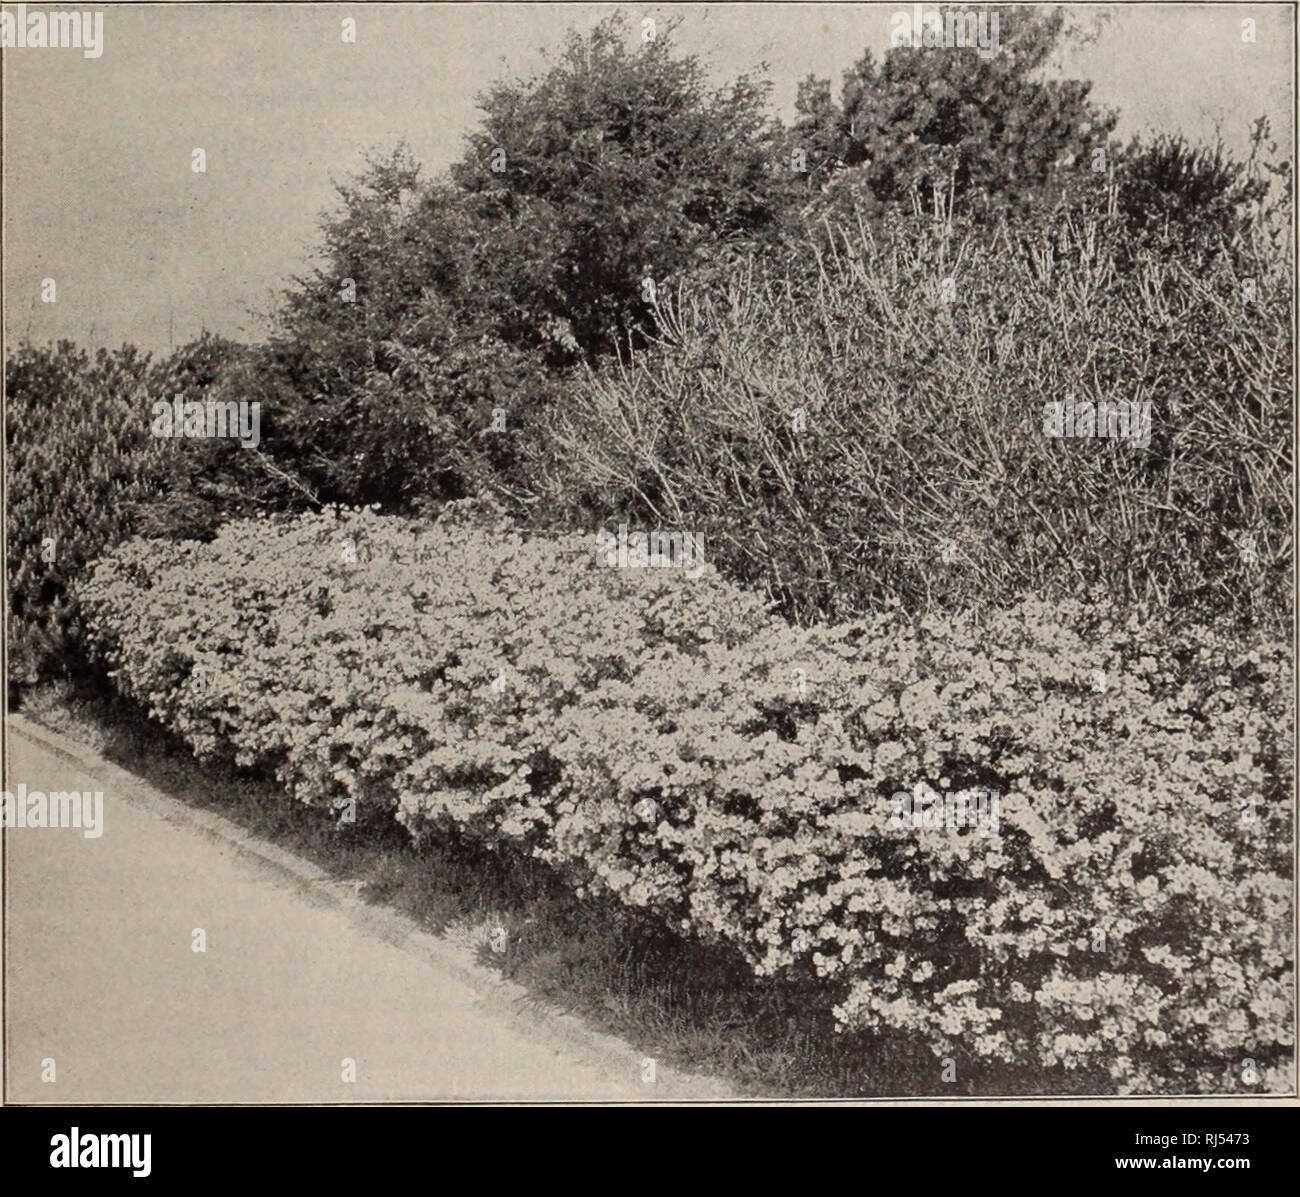 . Choice hardy trees and plants / F.W. Kelsey Nursery Company.. Nursery Catalogue. EVERGREEN SHRUBS. The finer Evergreen Shrubs described below are especially valuable for grouping, border and mass planting. The beautiful effects obtainable from such plantations of Andromeda Floribunda, Azalea Amcena, Hardy Rhododendrons, Kalmias and Mahonias make these plants indispensable for the best results in all fine ornamental grounds. For a number of years the furnishing of the best quality of this class of stock in quantity has been a special feature of my business, and I am able, as heretofore, to fu Stock Photo